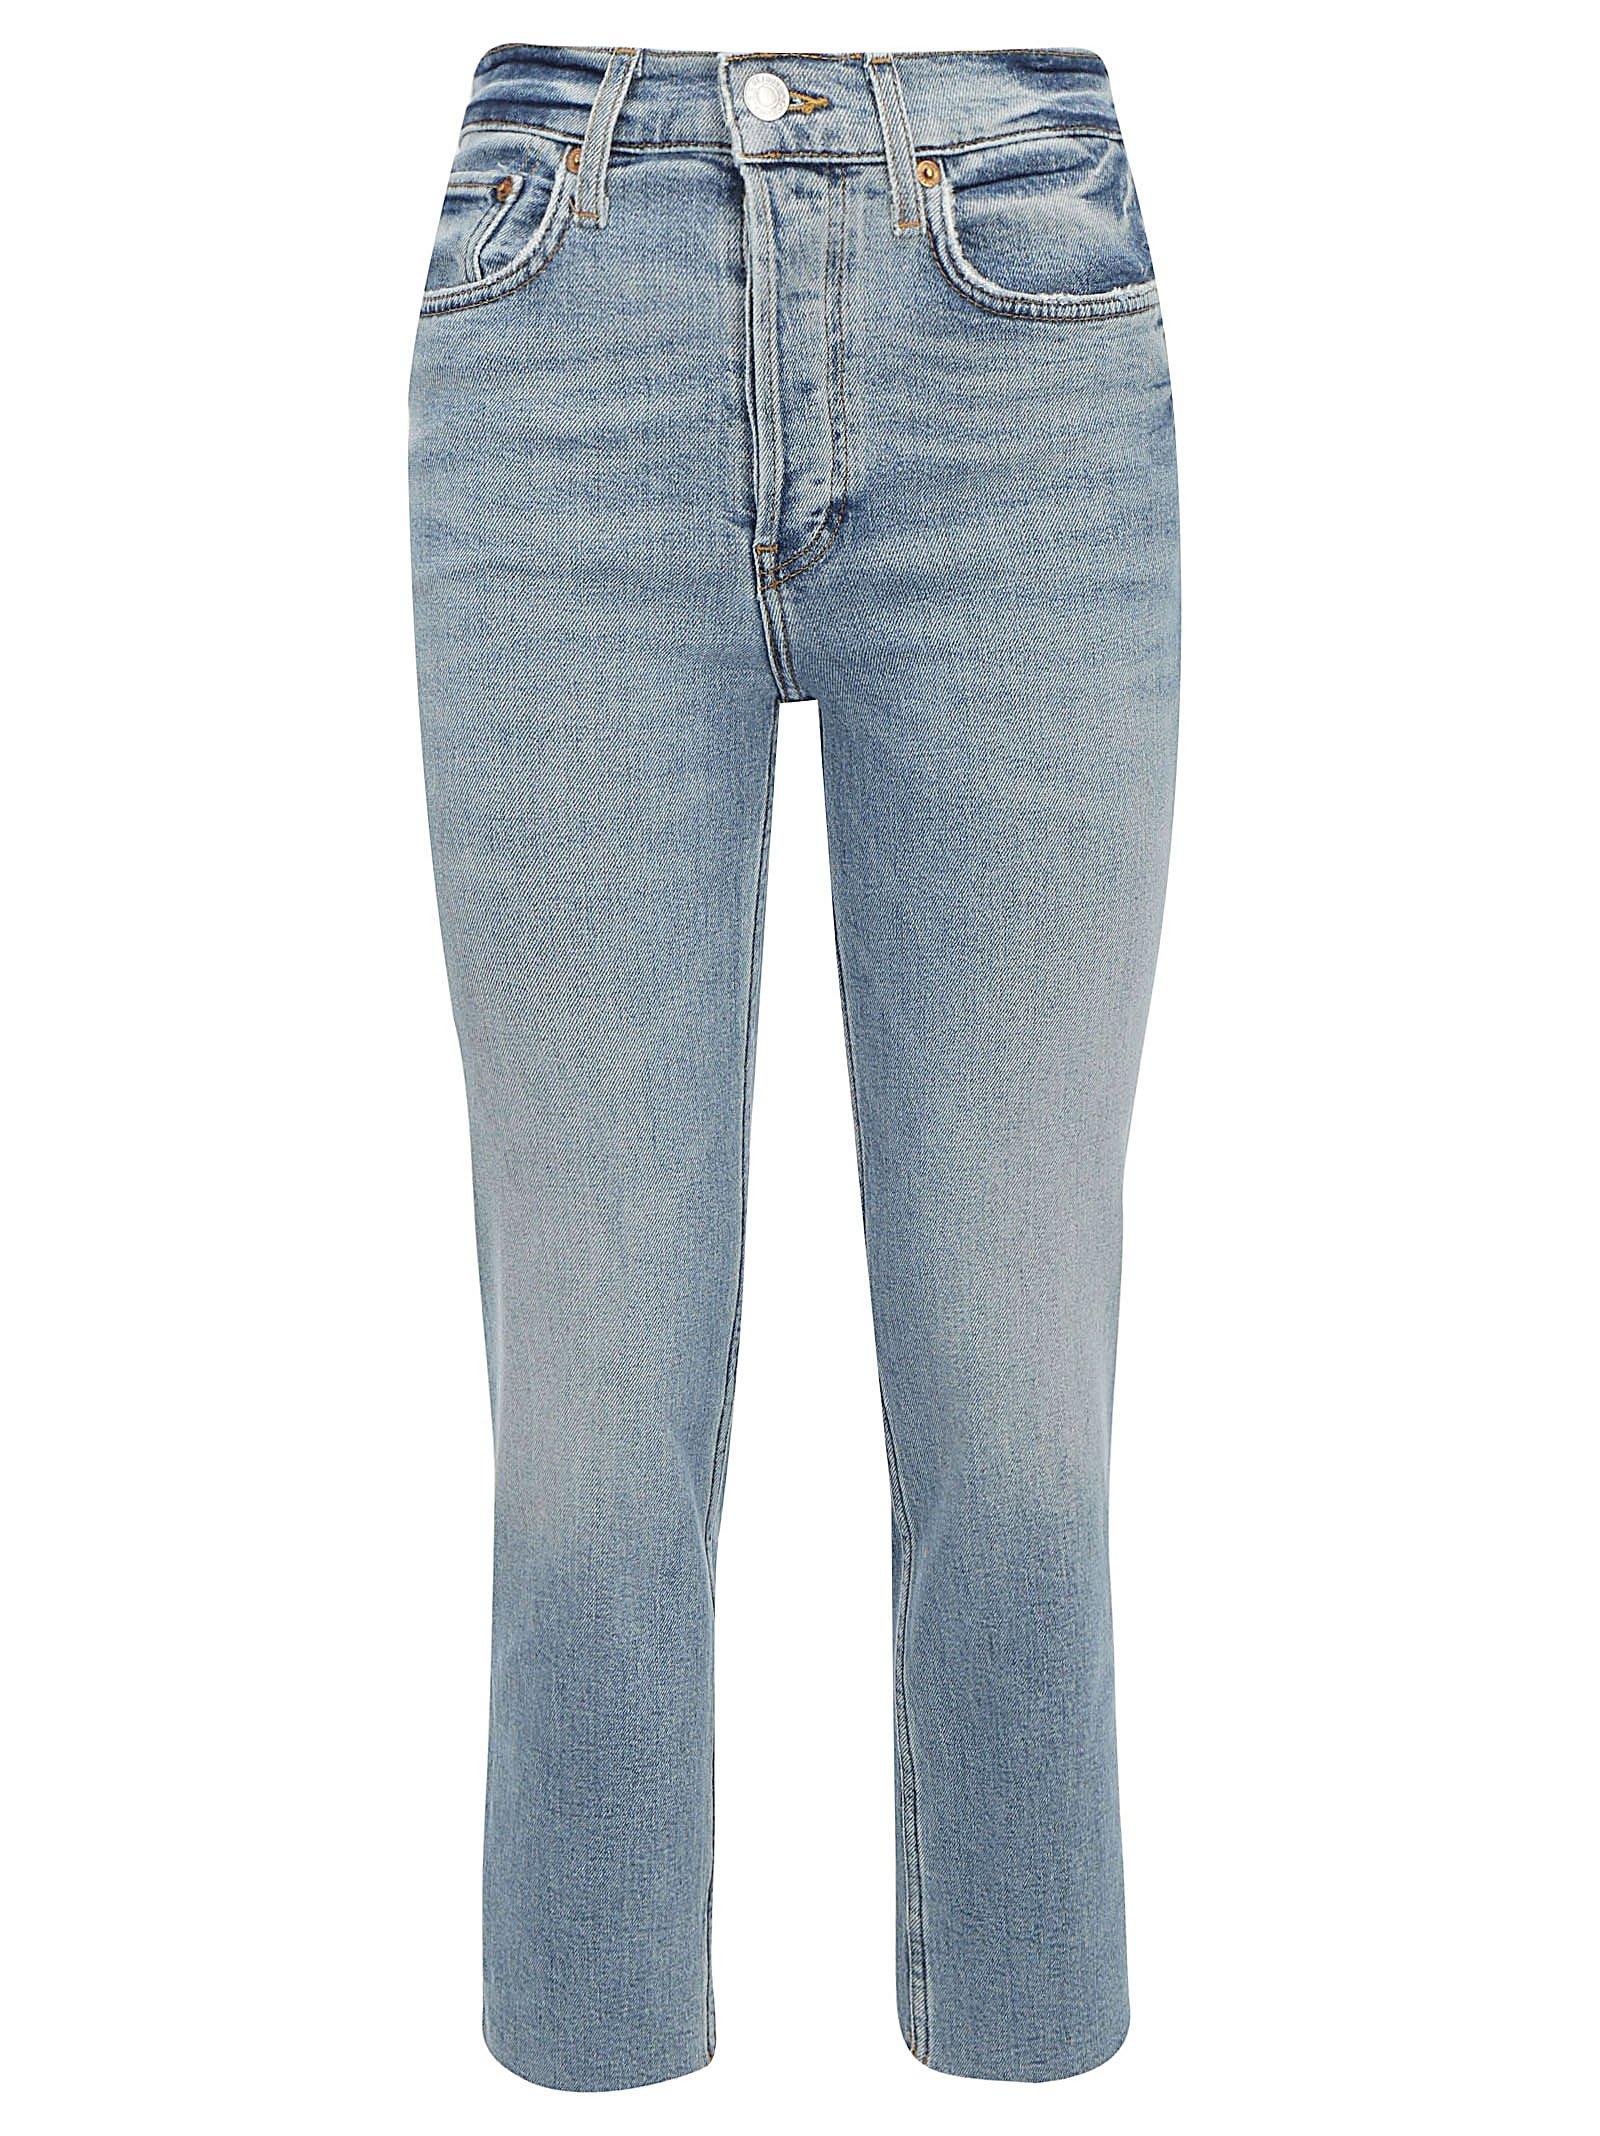 Buy Womens Blue High-rise Stove Pipe Jeans Online at Lowest Price in  Vietnam. 650164766